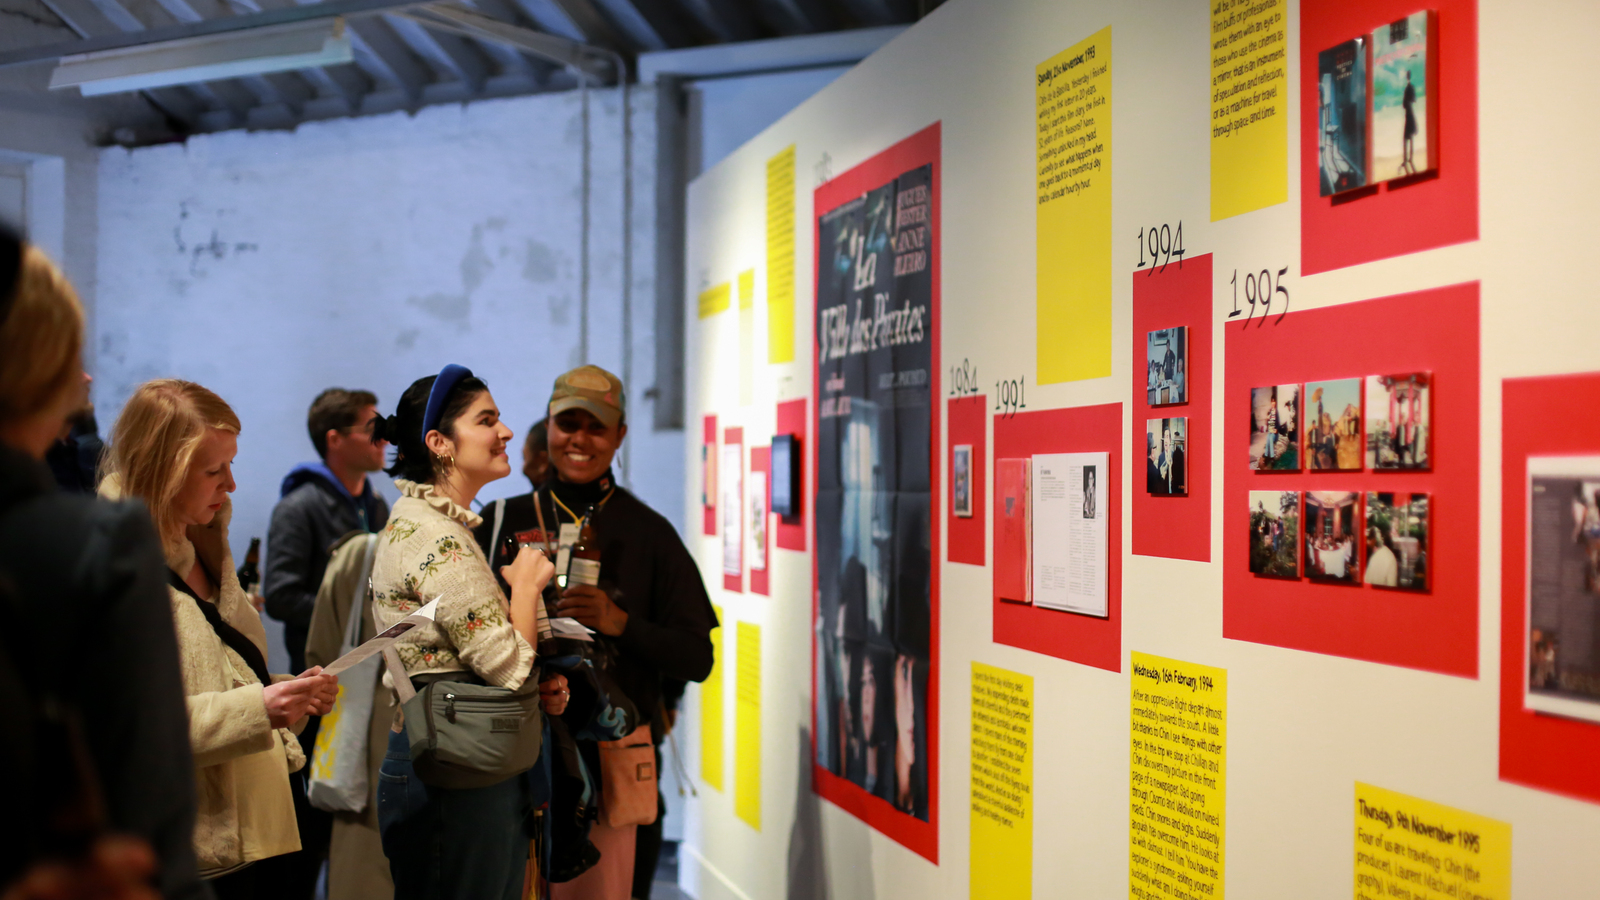 People looking at images on display in an exhibition at a film festival